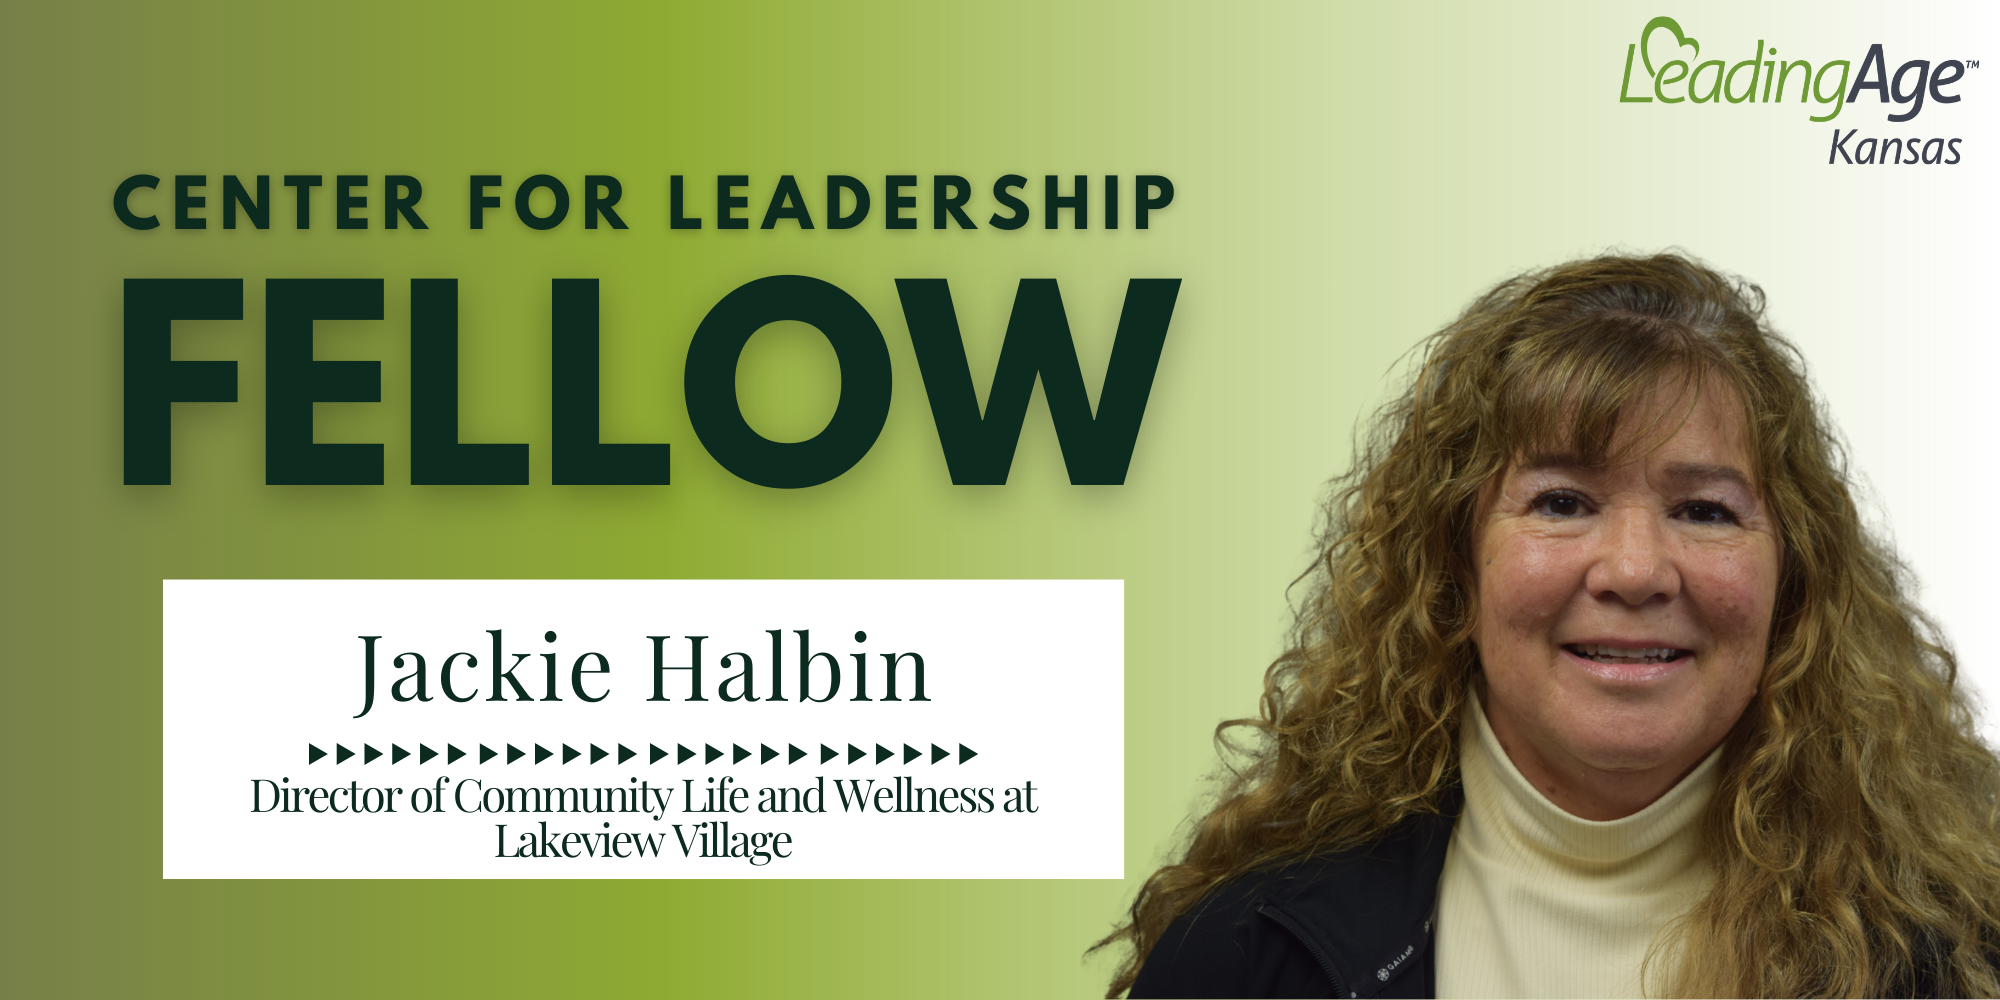 Jackie Halbin, Director of Community Life & Wellness at Lakeview Village